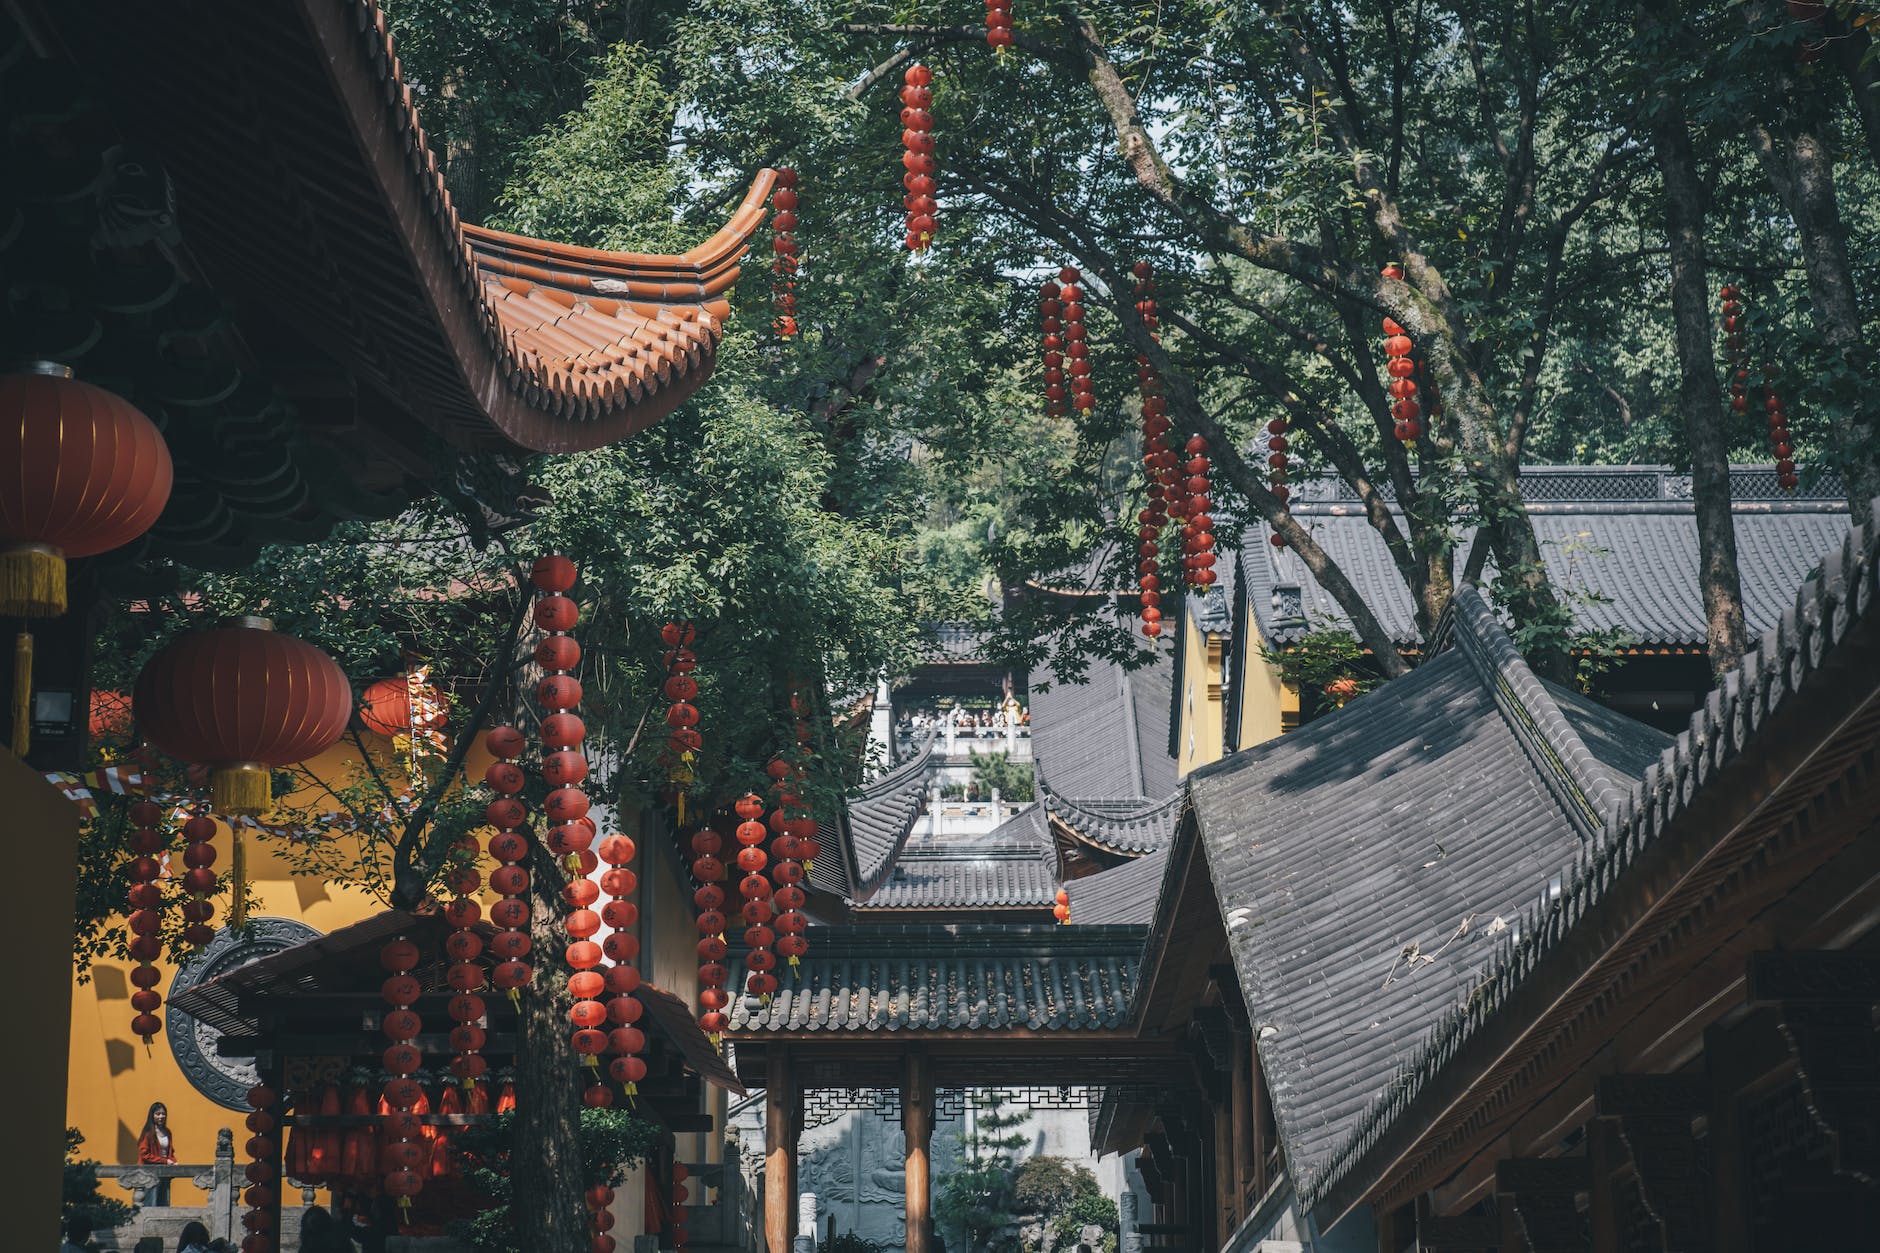 faxi temple in hangzhou in china